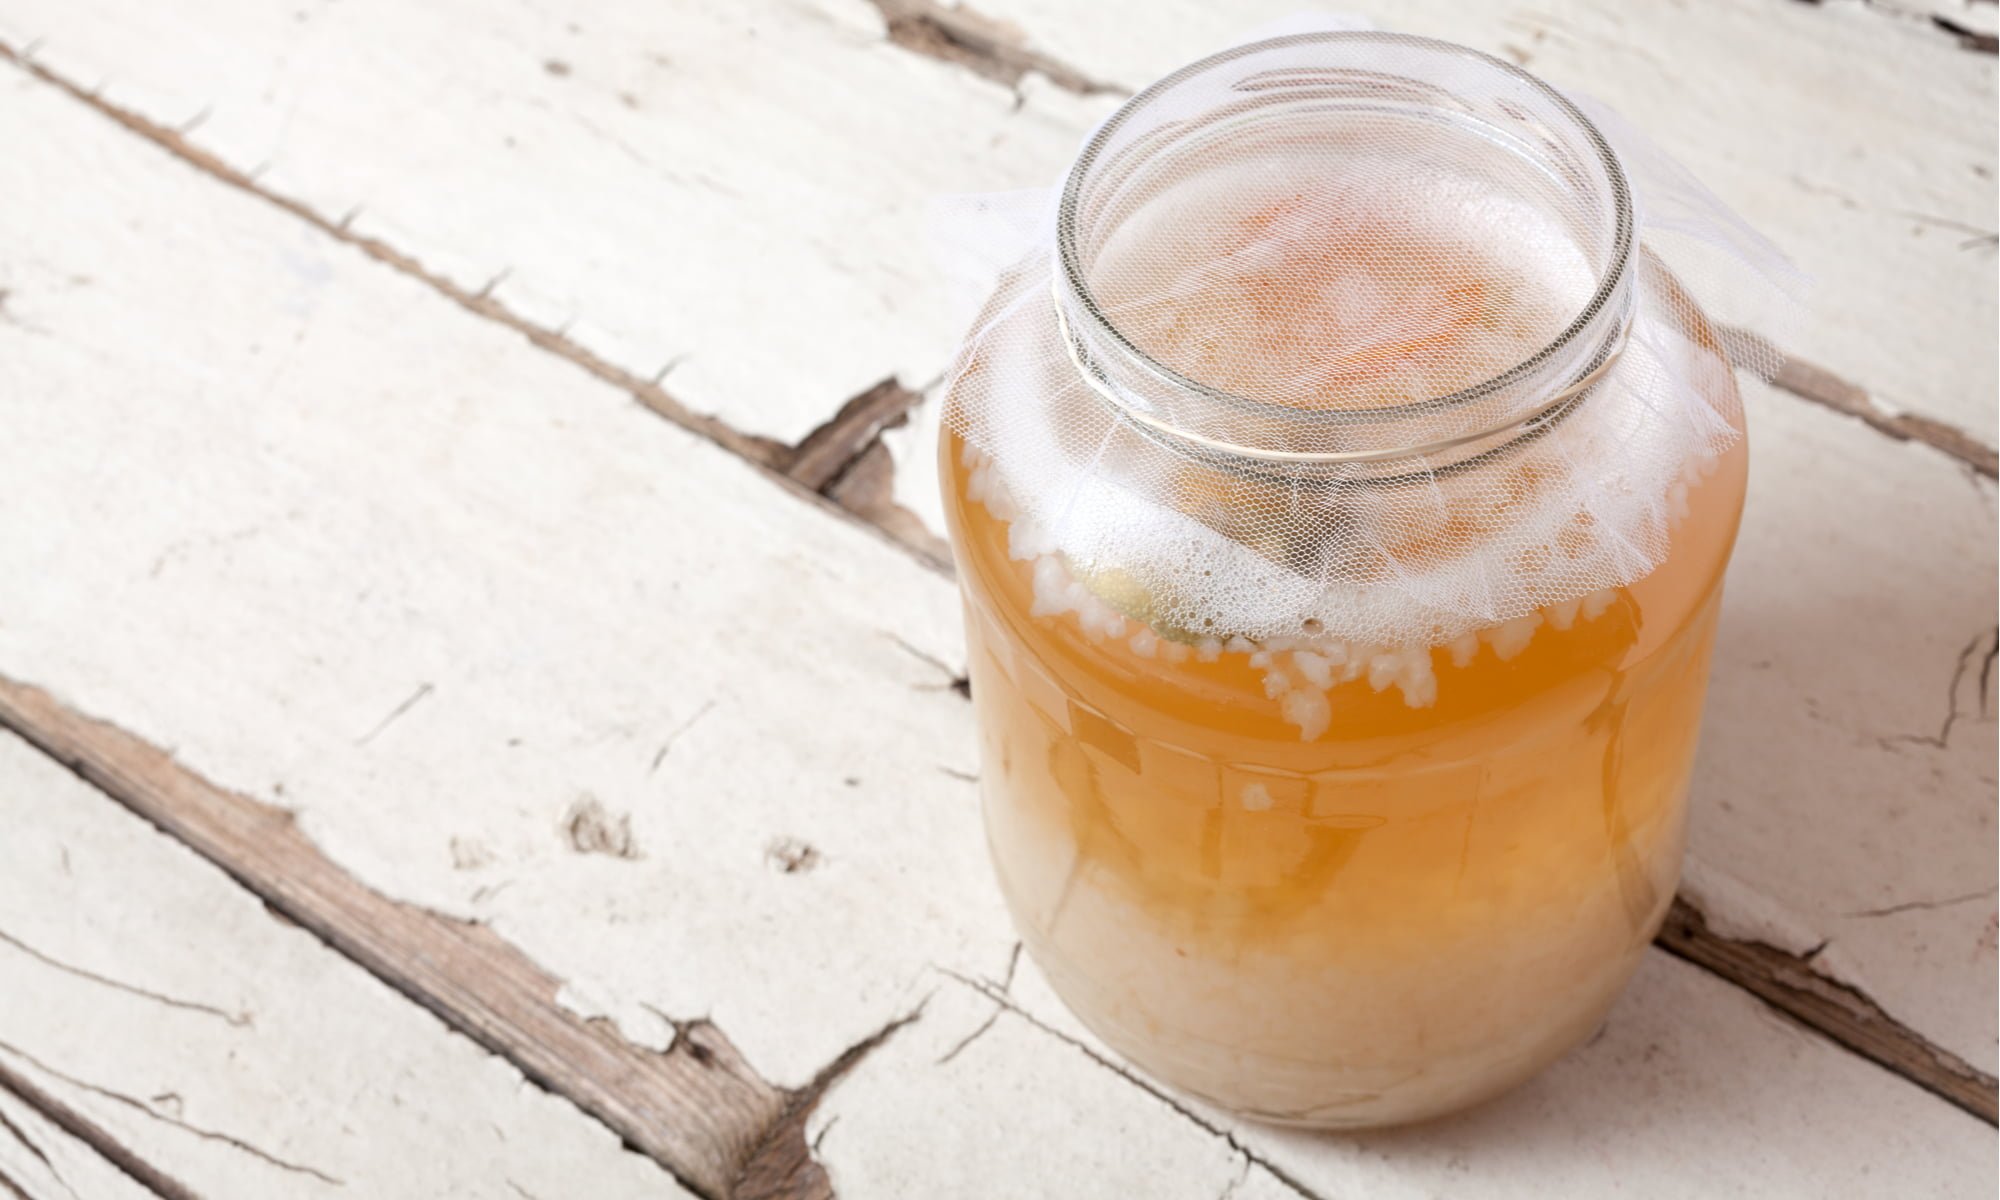 What’s Water Kefir And Why Should You Drink It?